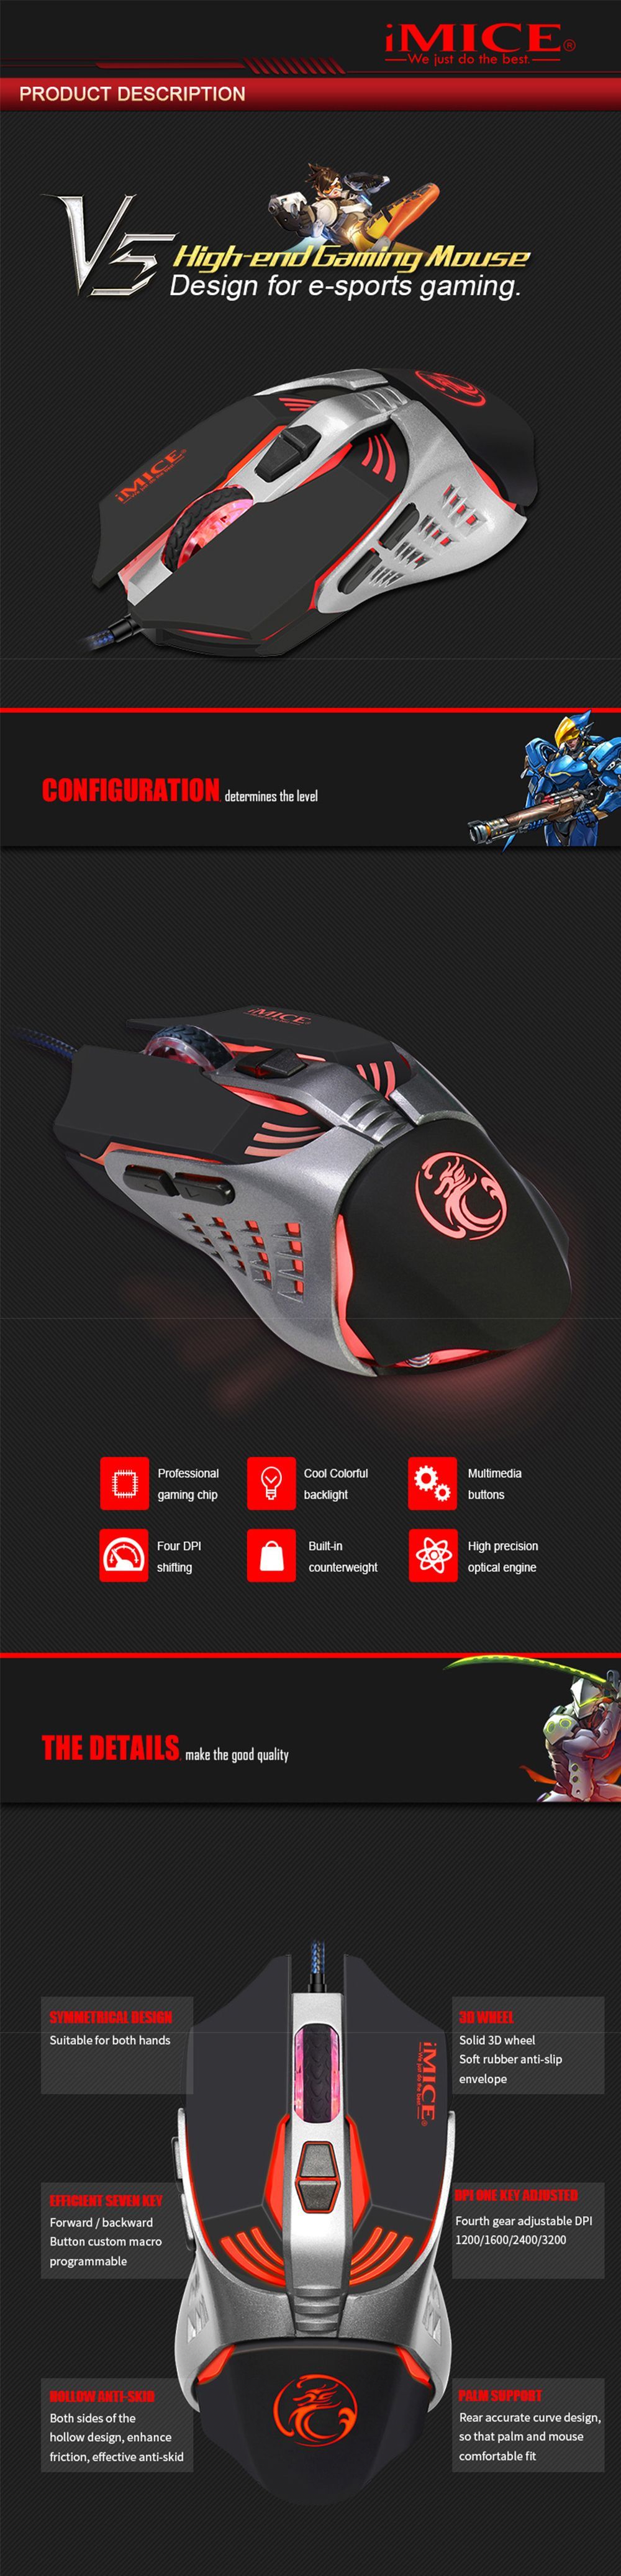 IMICE-V5-3200DPI-Adjustable-USB-Wired-RGB-Optical-Gaming-Mouse-1557859